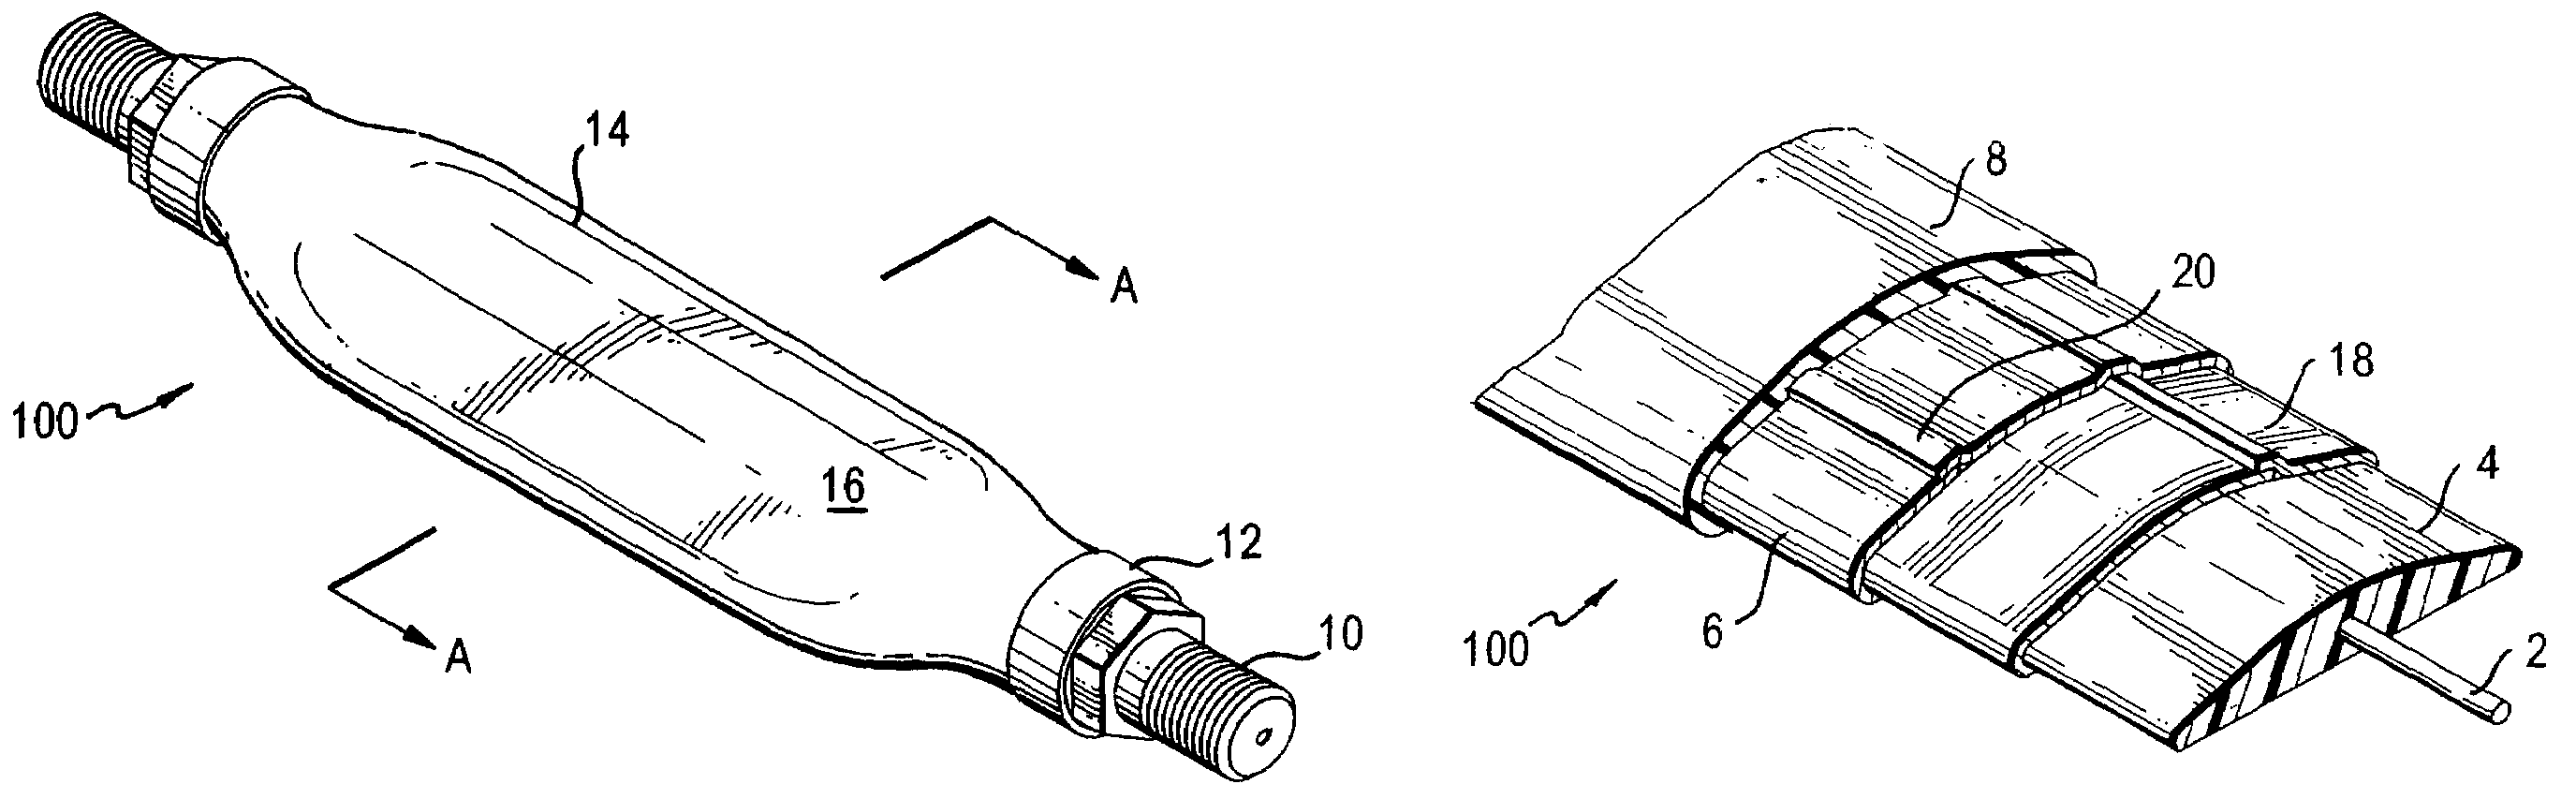 Coaxial cable jumper device